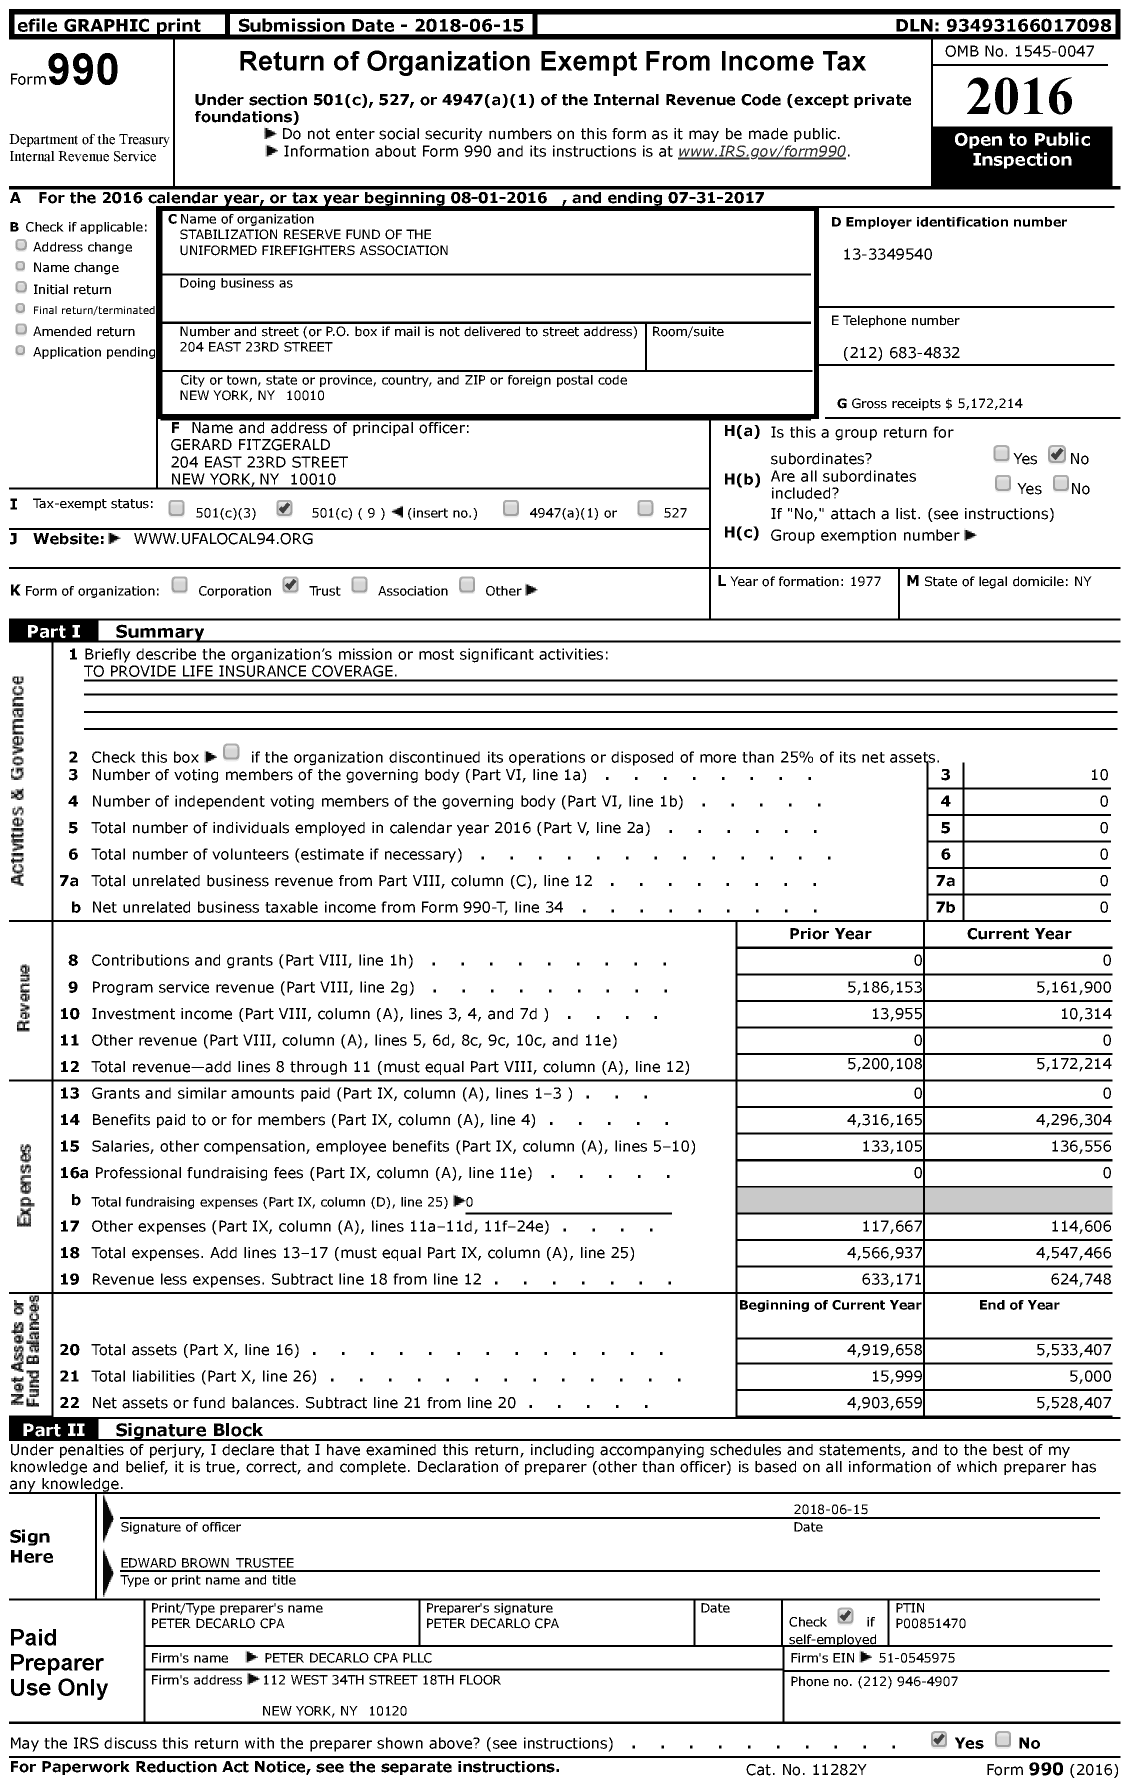 Image of first page of 2016 Form 990 for Stabilization Reserve Fund of the Uniformed Firefighters Association